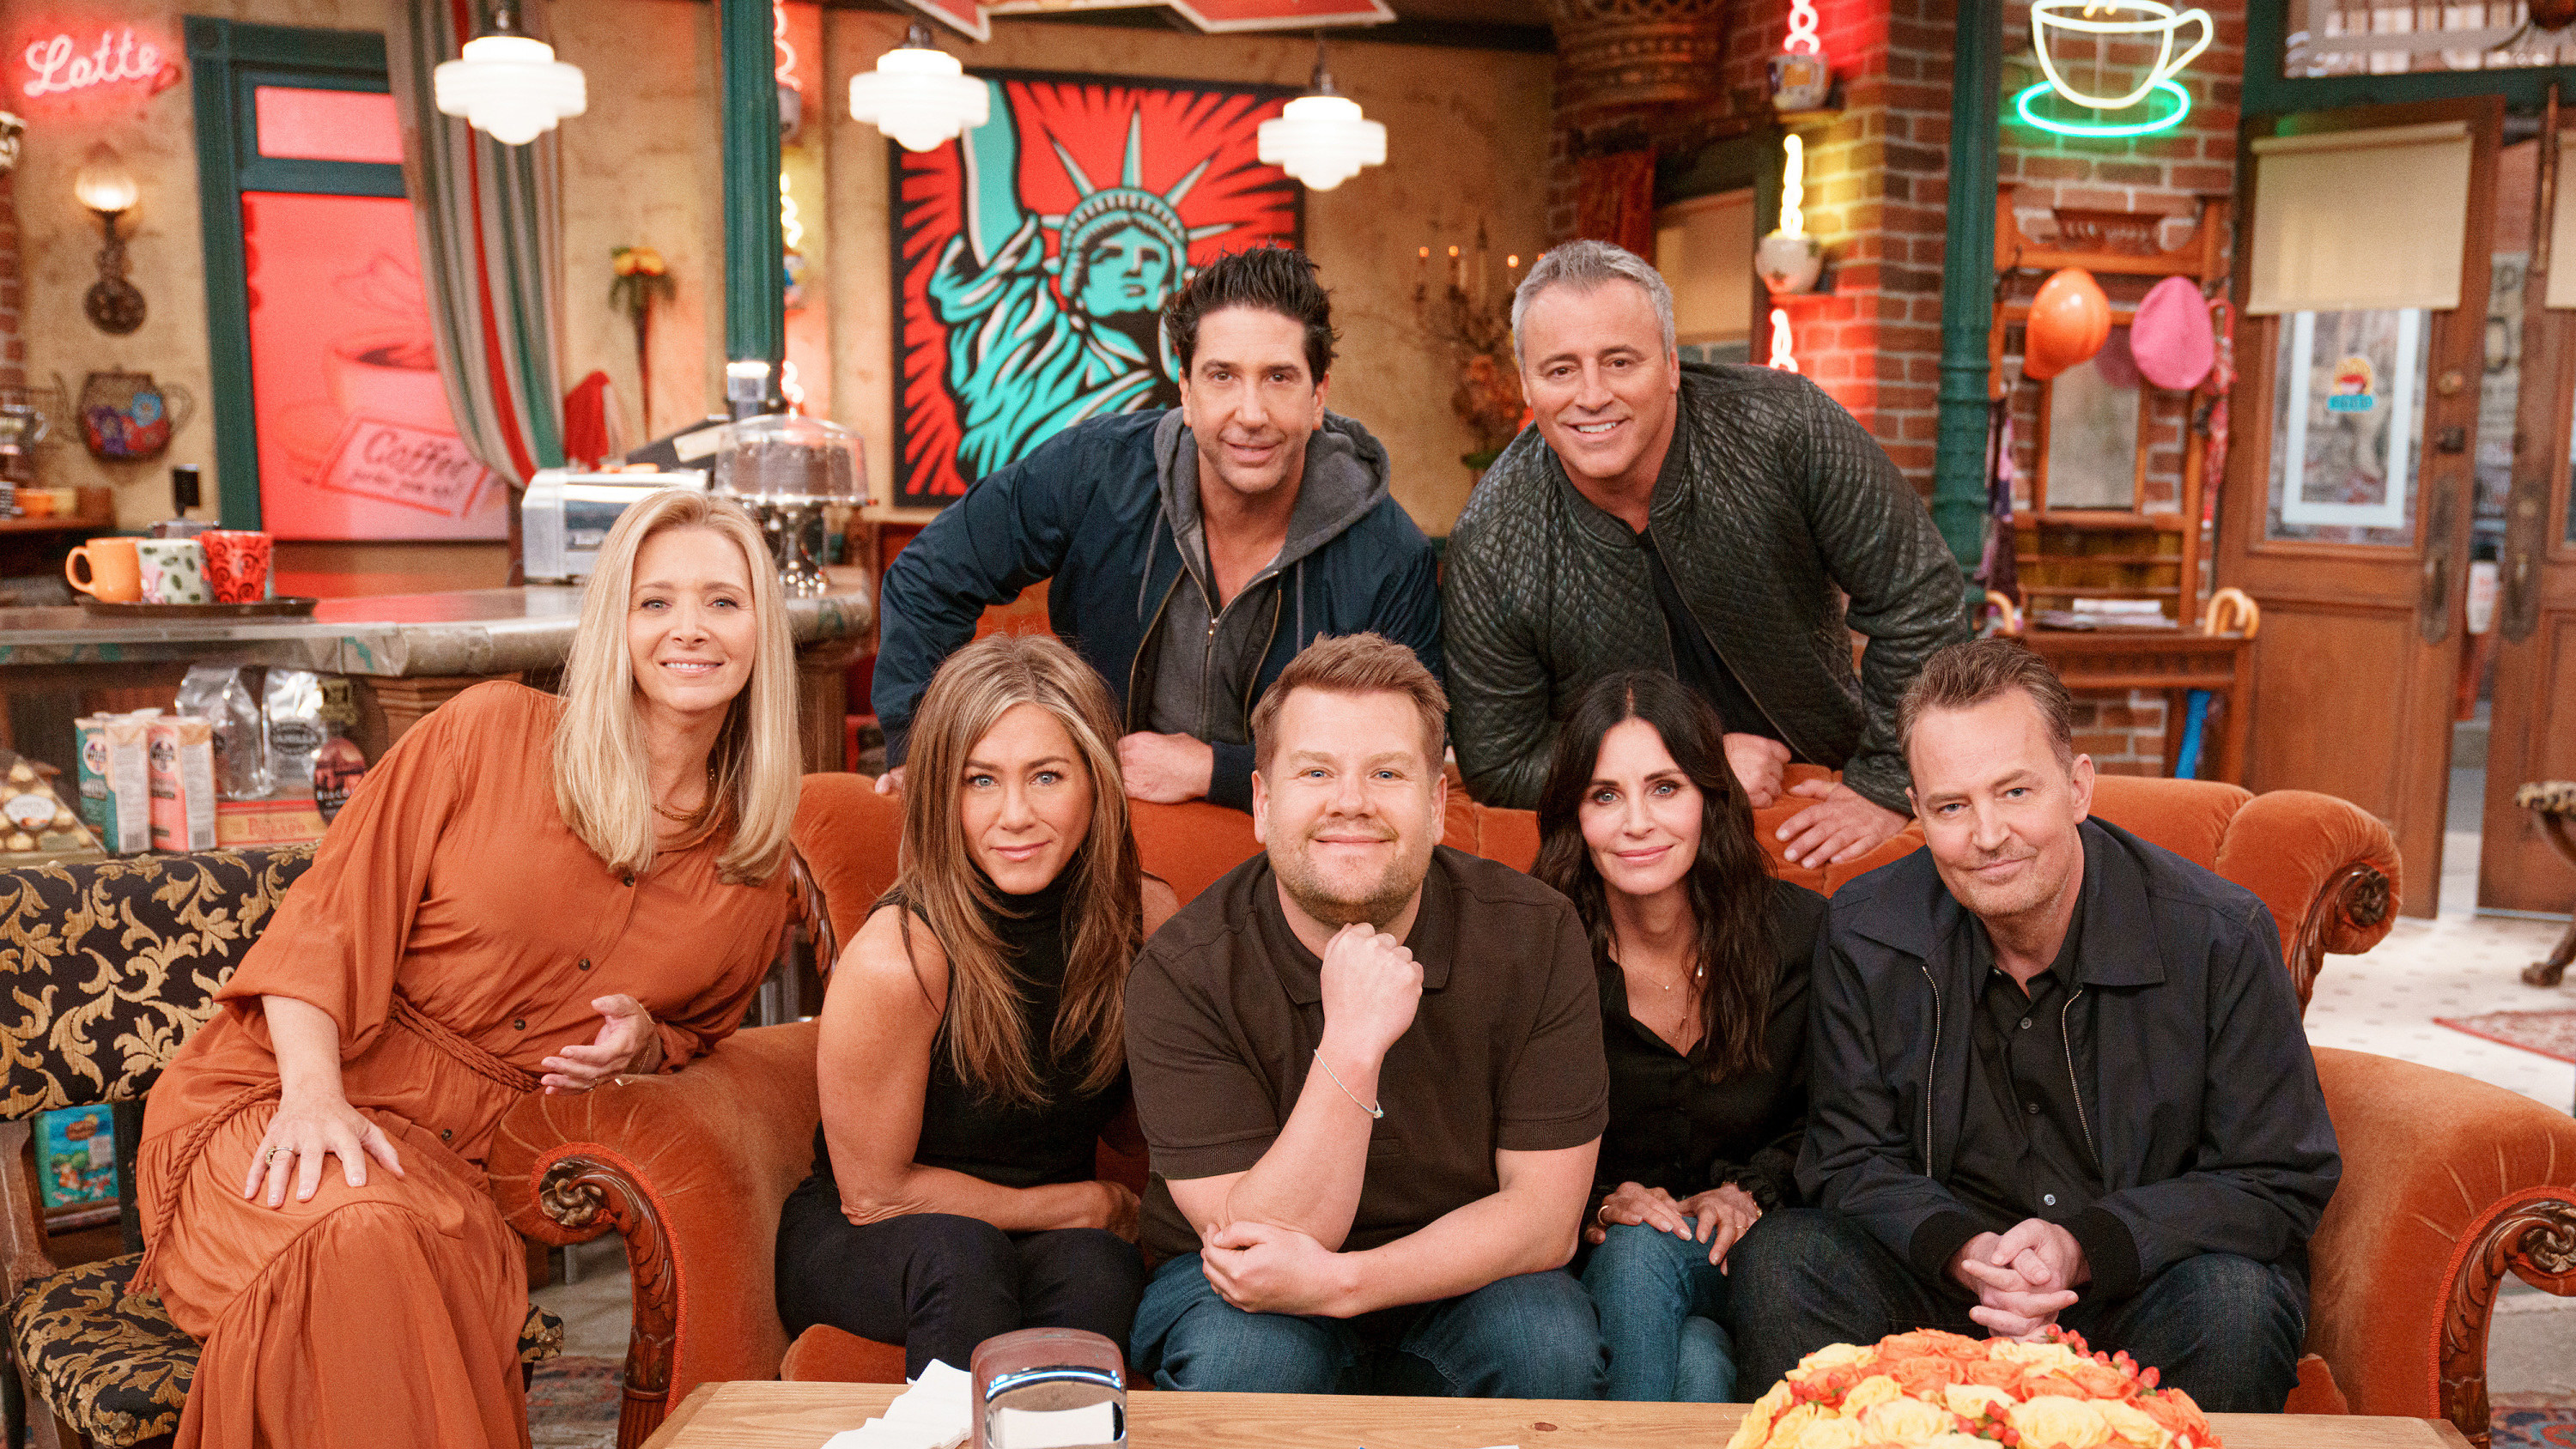 The cast of Friends pose for a photo with James Corden